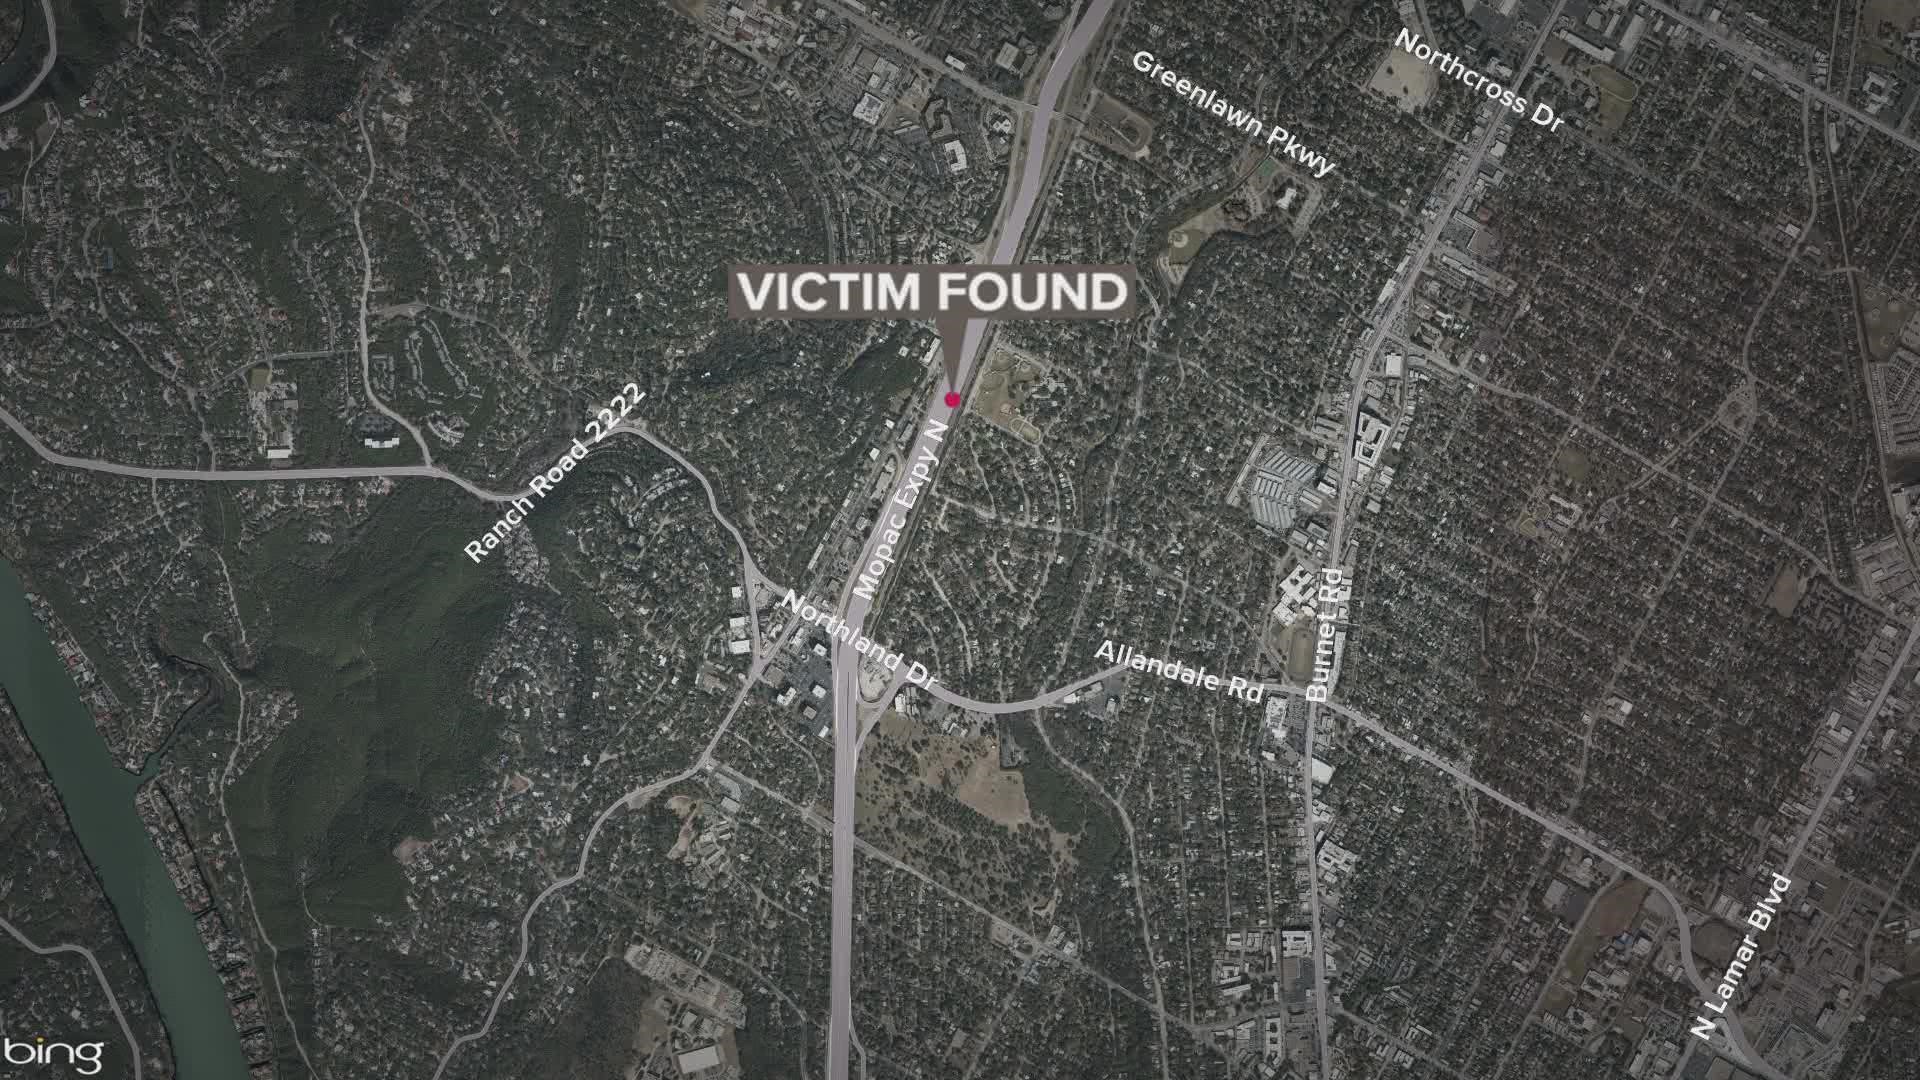 This case is being investigated as Austin's 57th homicide of 2022.